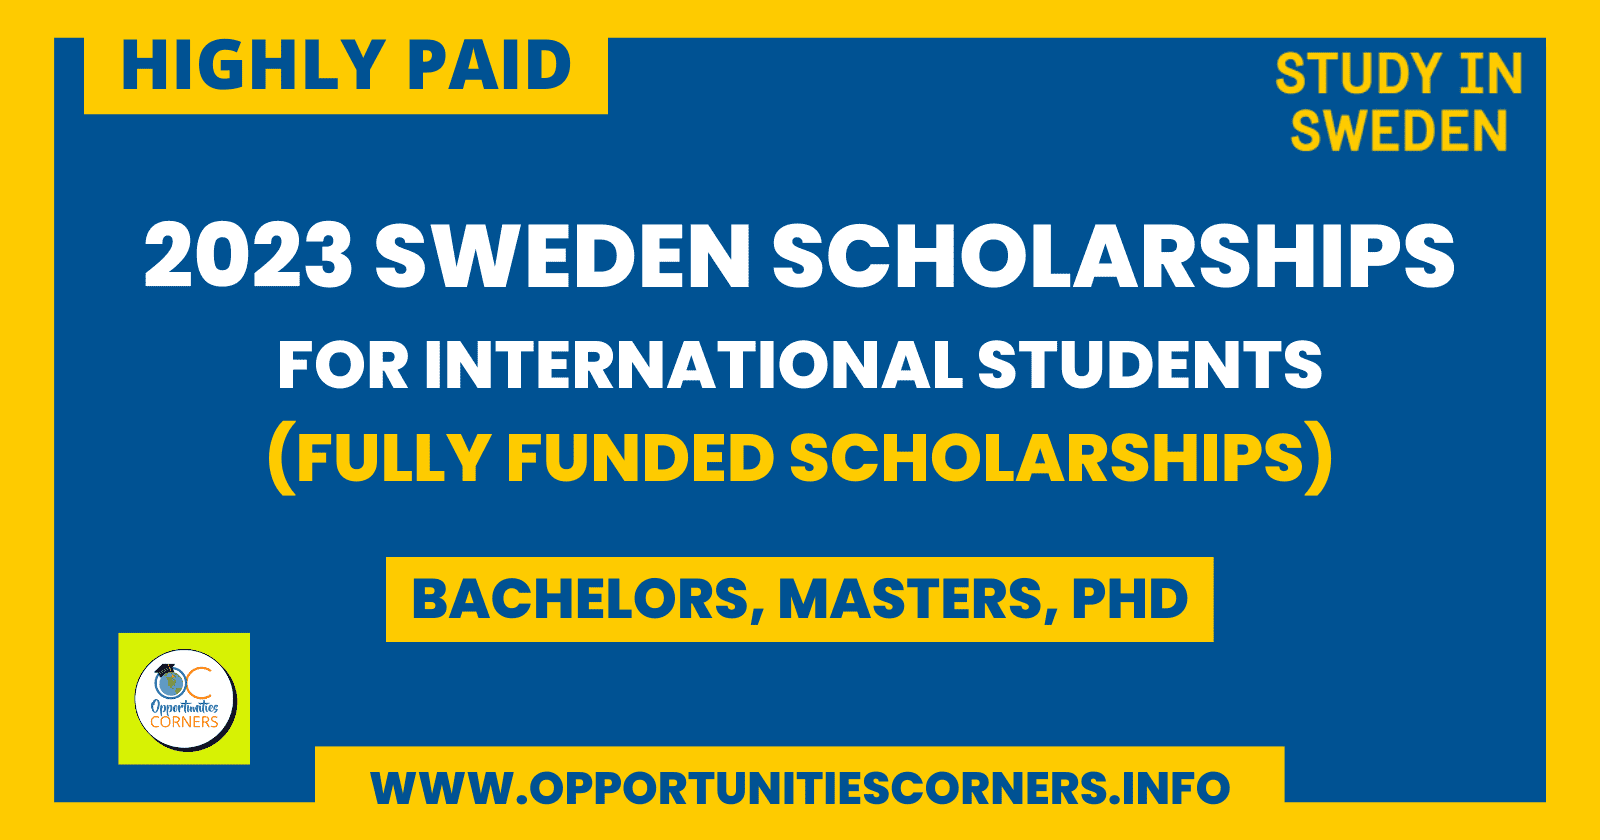 phd scholarships in sweden for international students 2023